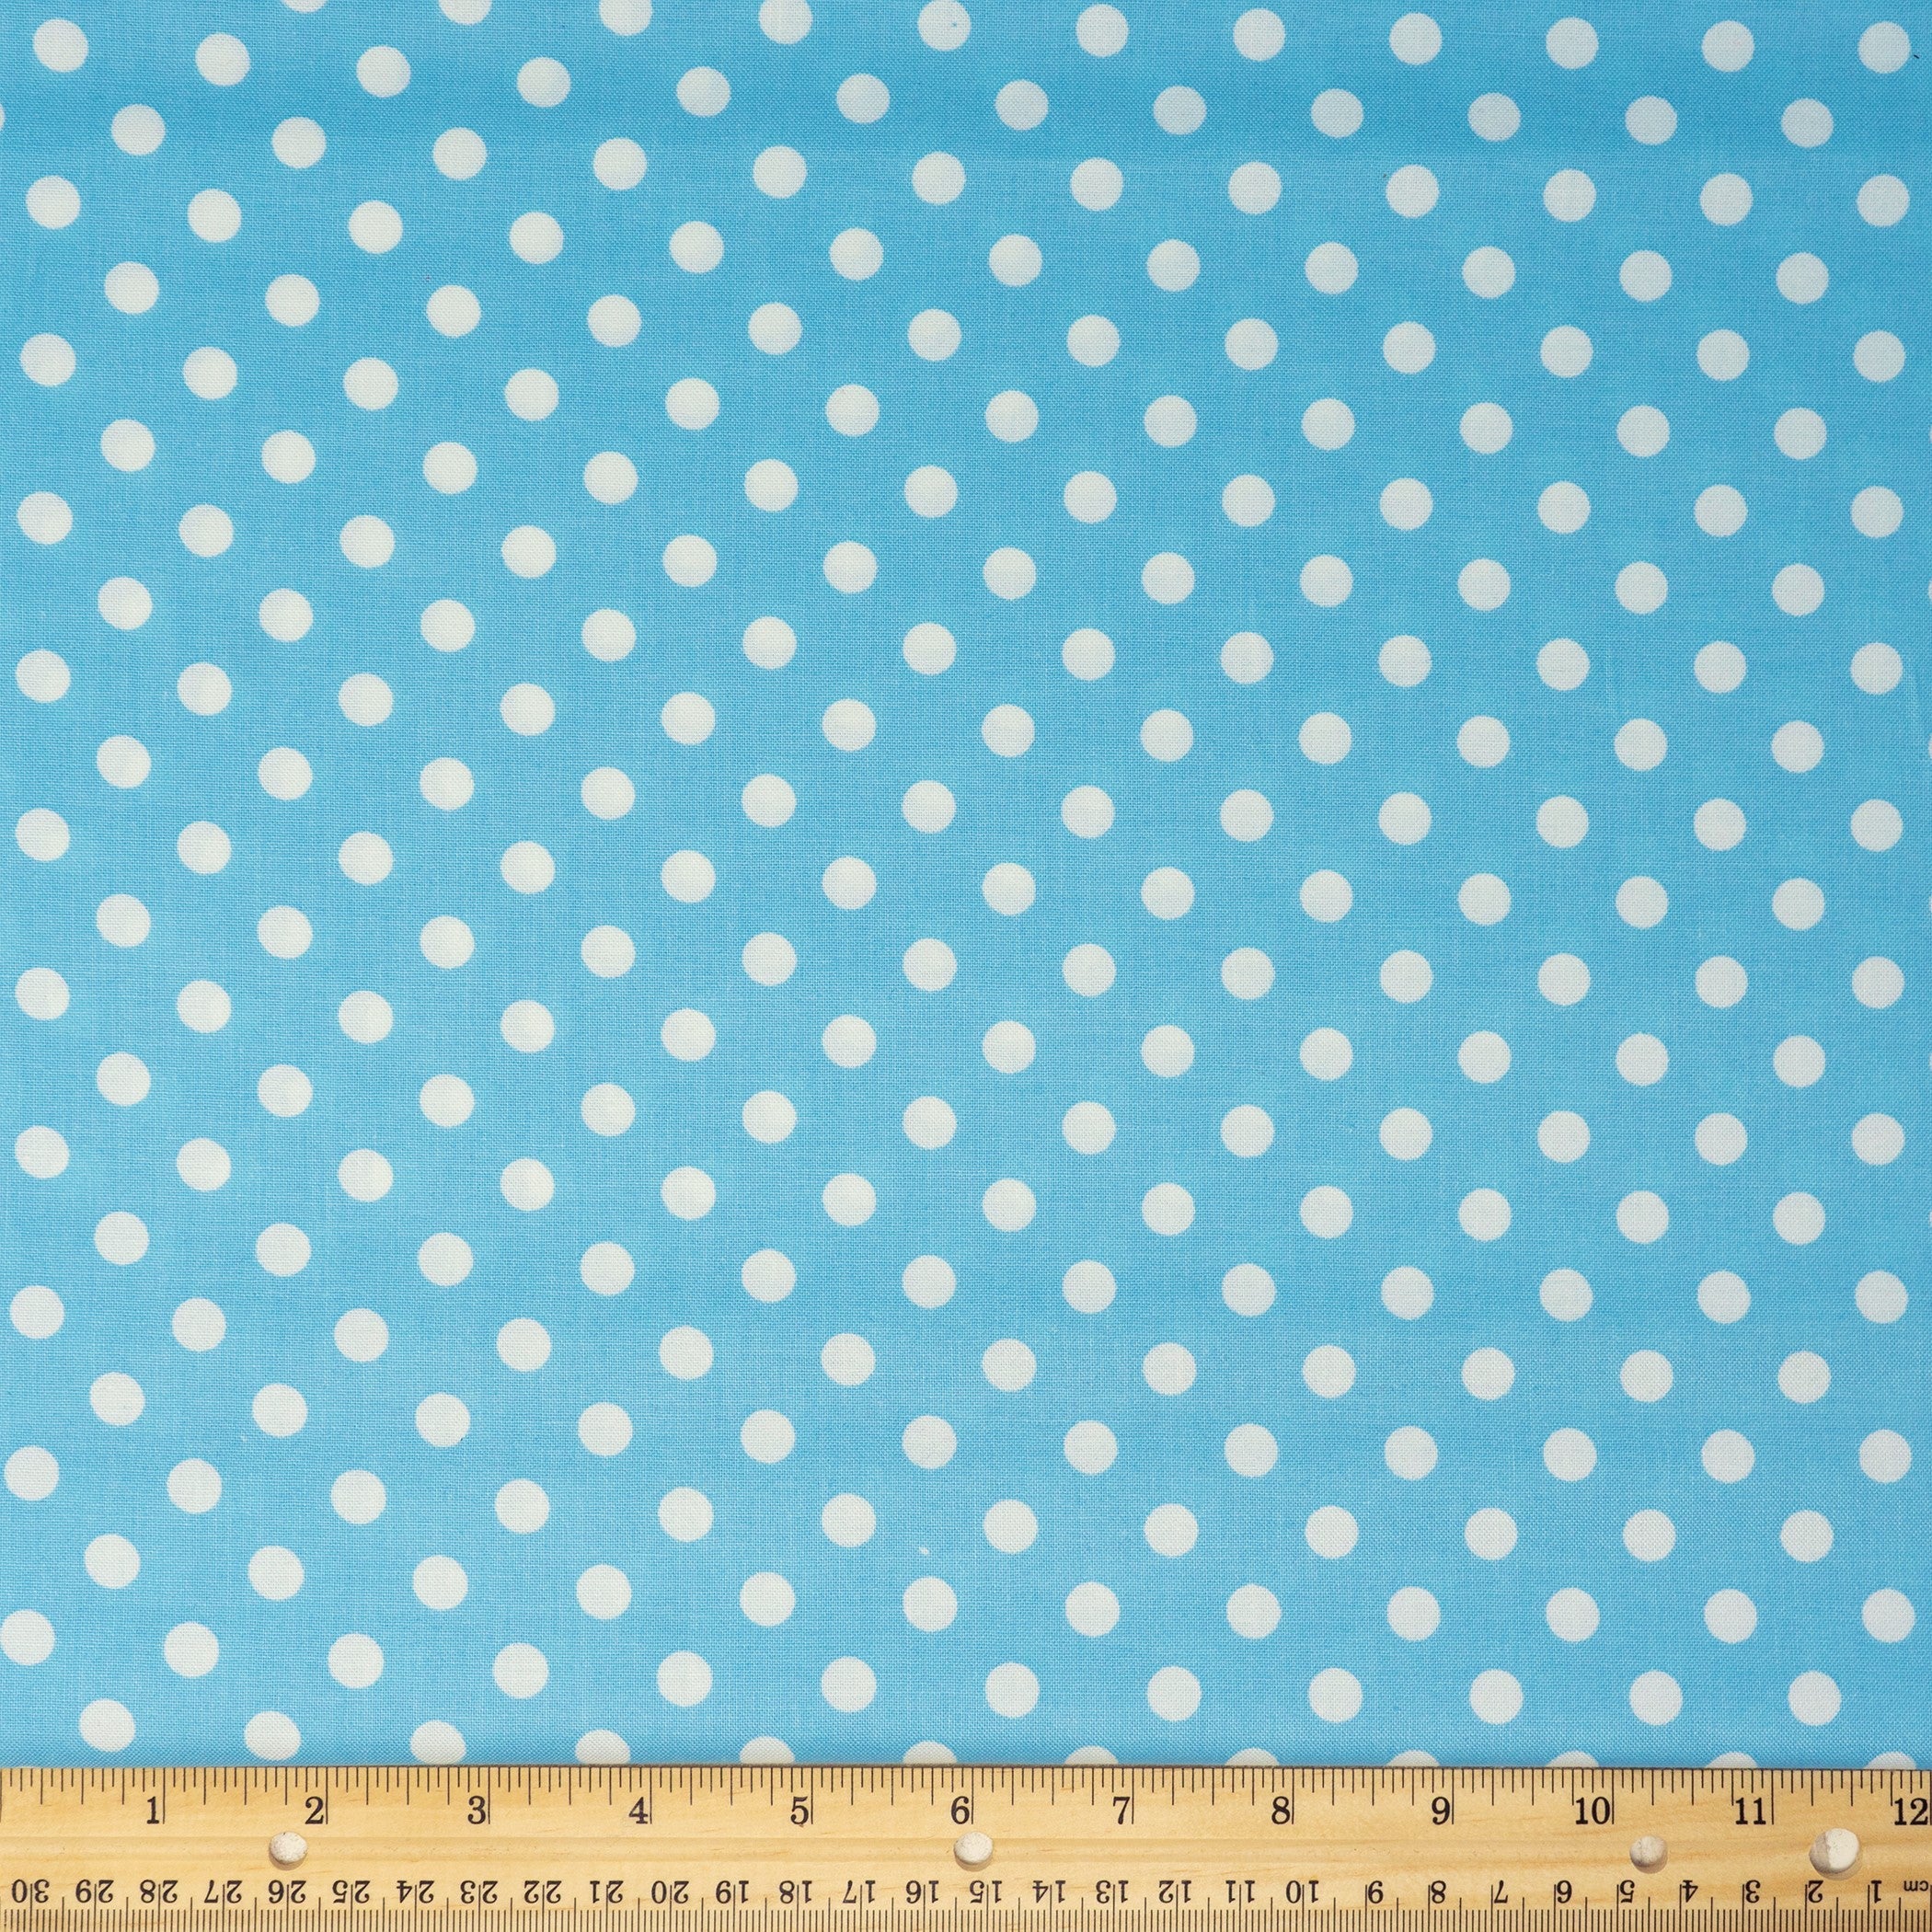 Waverly Inspirations Cotton 44" Big Dot Powder Blue Color Sewing Fabric by the Yard